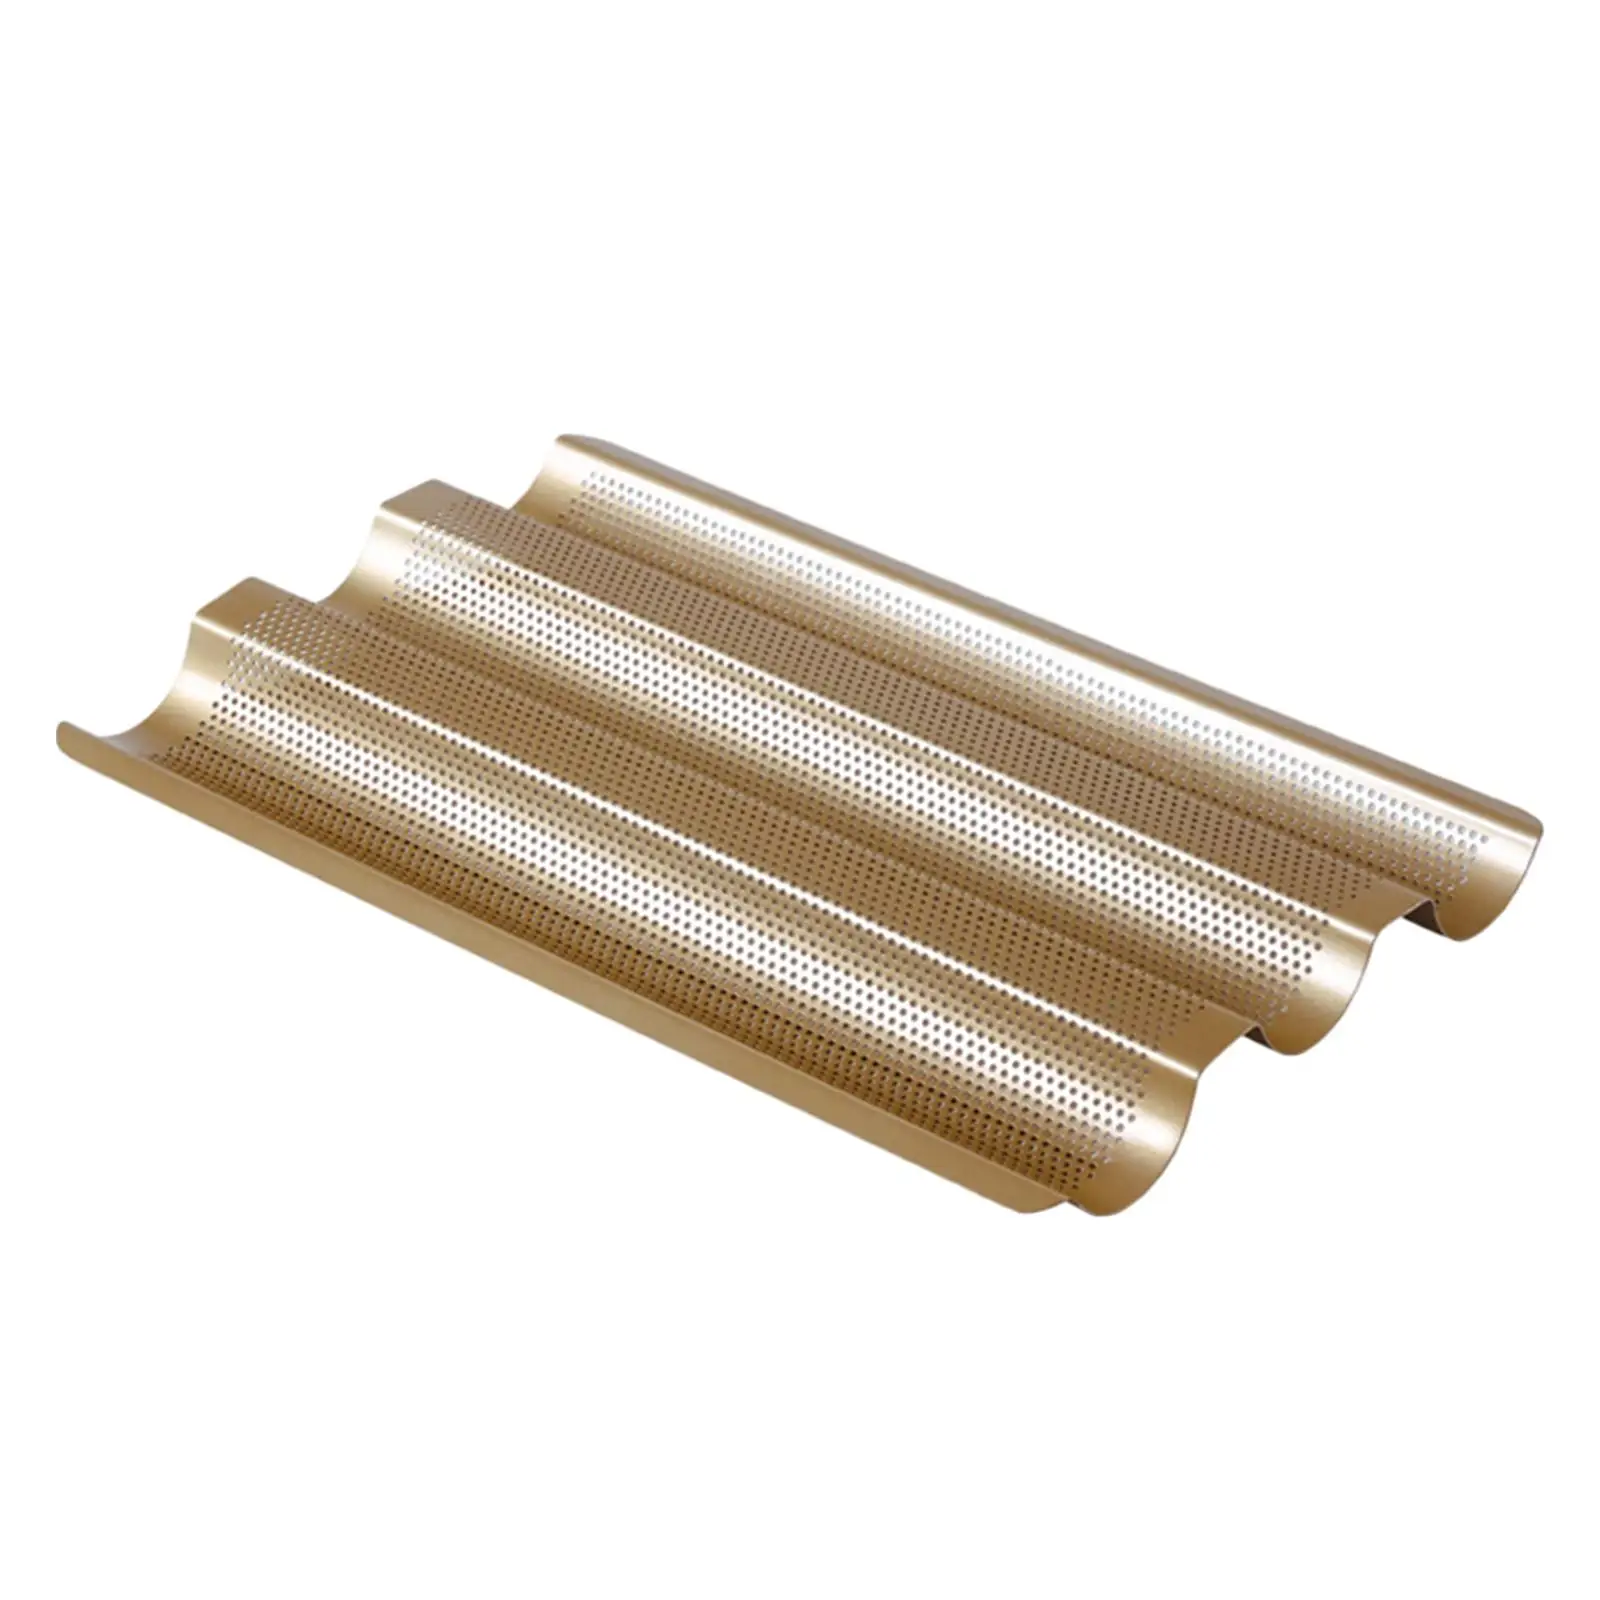 Perforated Baguettes Pan,French Bread Pan, Perforated 3 Slot Nonstick Bread Baking Tray for Baking French Bread